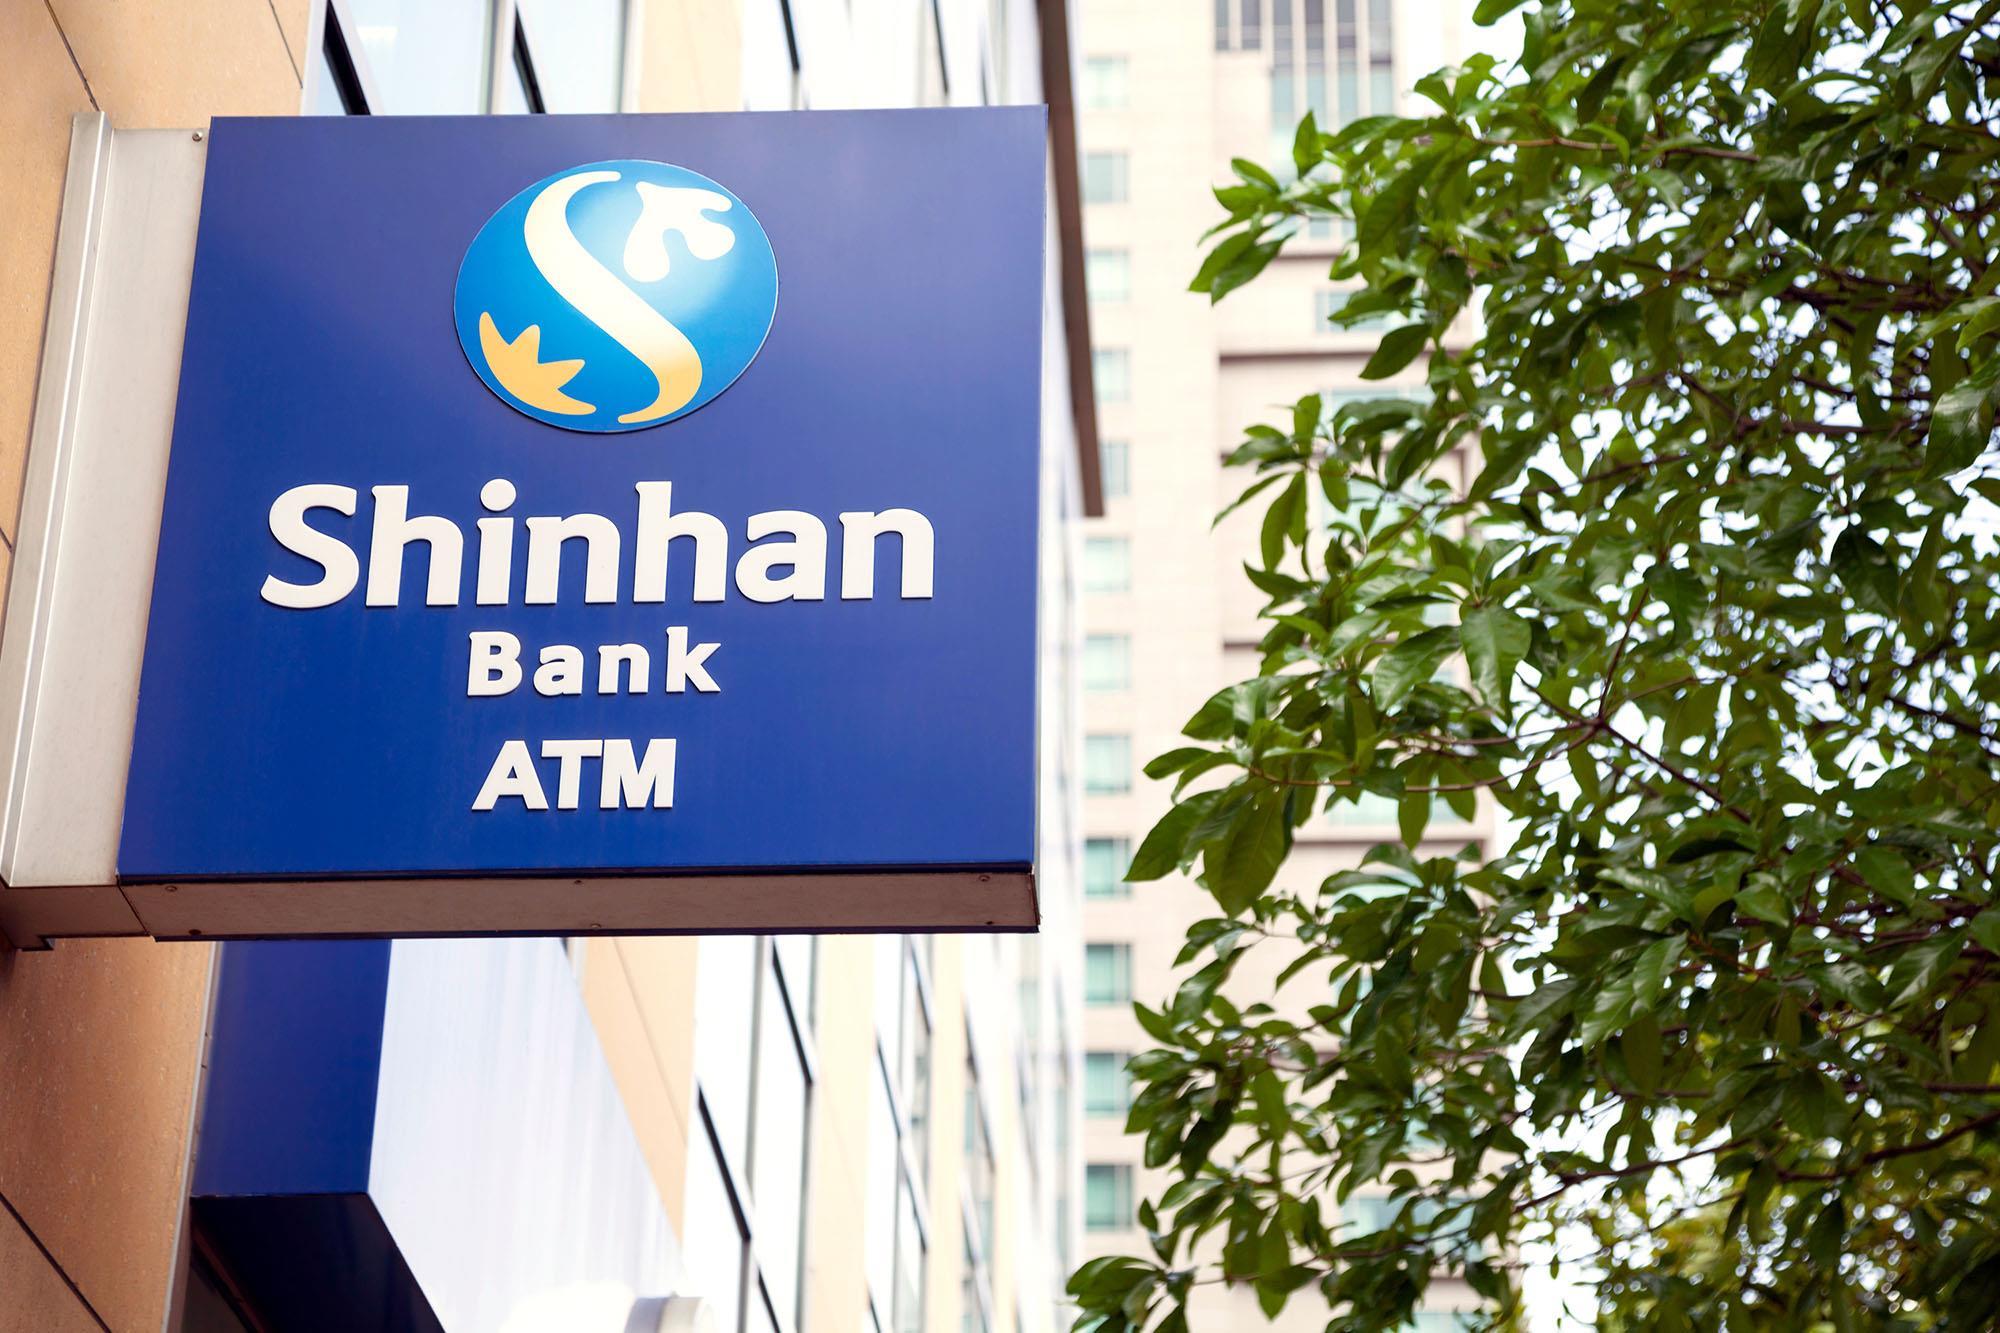 Shinhan Bank America fined $25M for repeat AML compliance failures